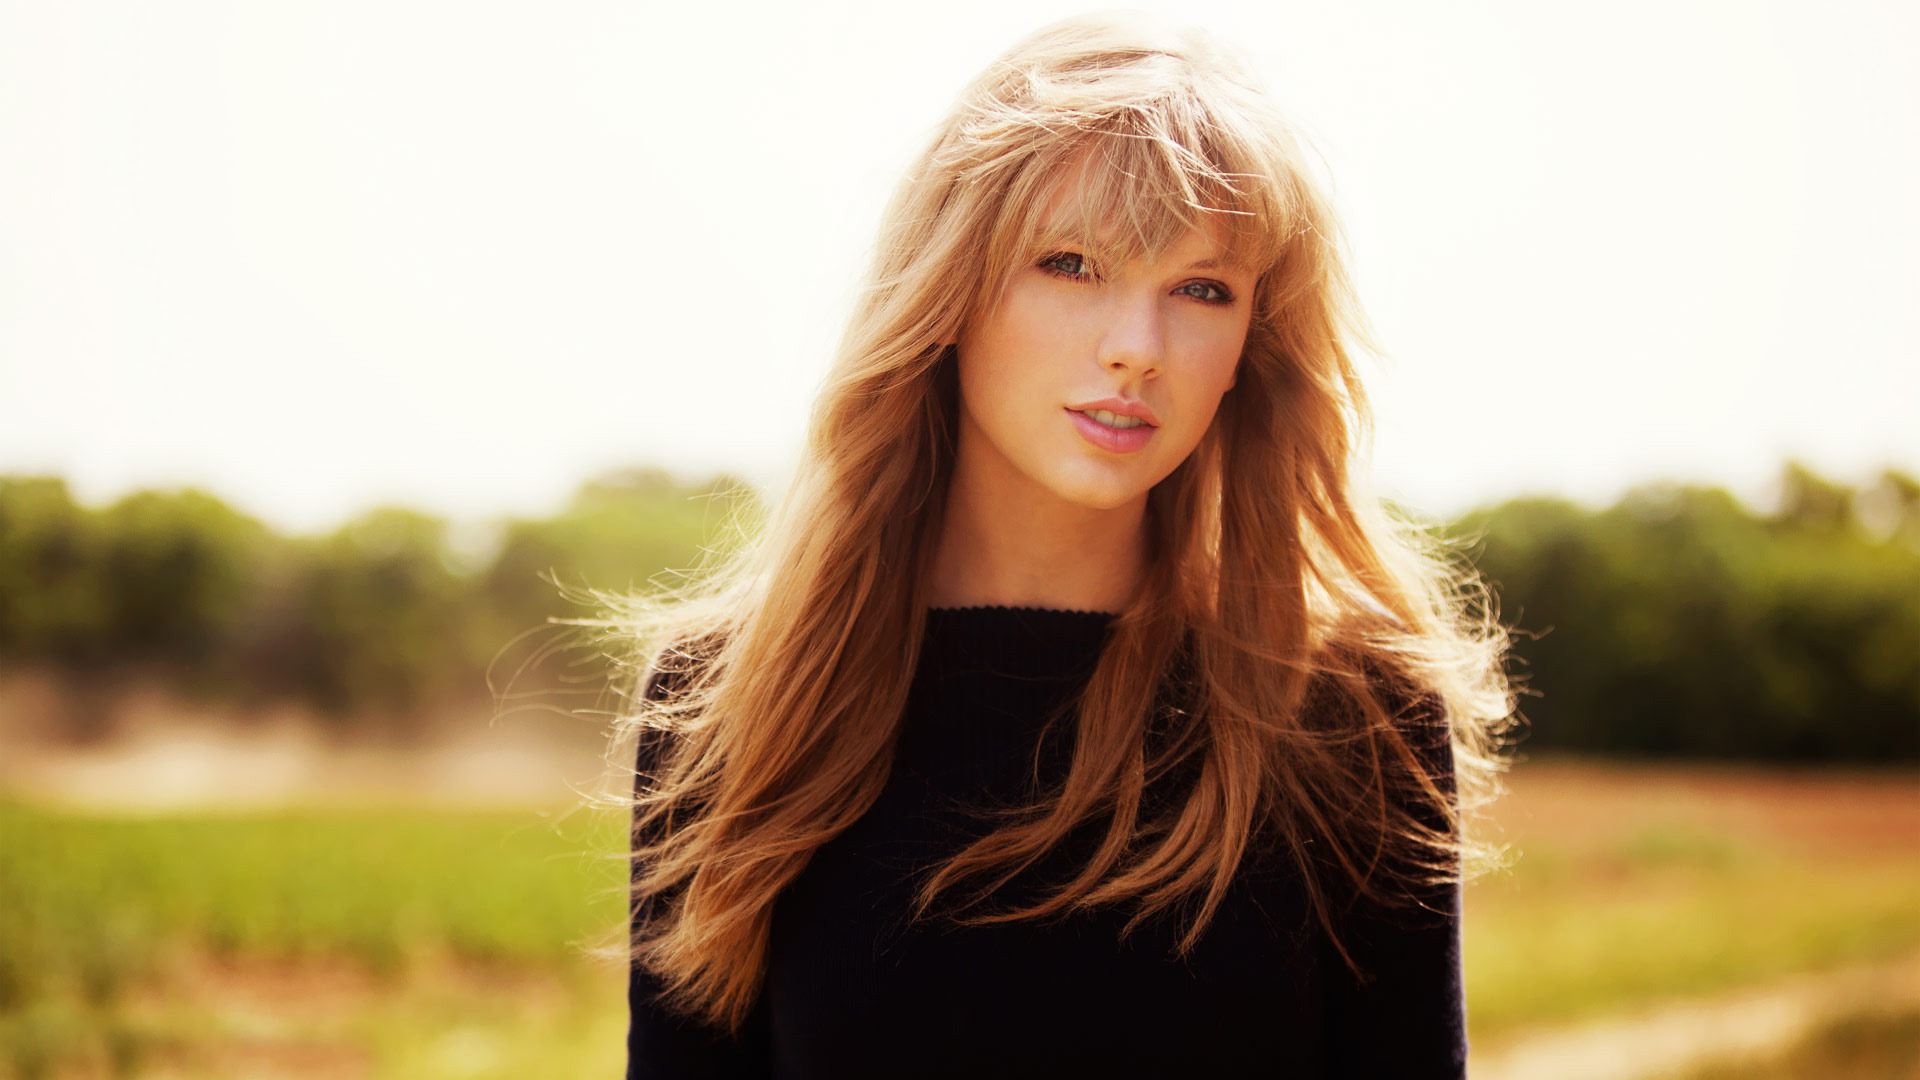 These Taylor Swift HD Wallpapers Pack Free Download for desktop. Absolutely free to download and available in high definition for your desktop pc, ...